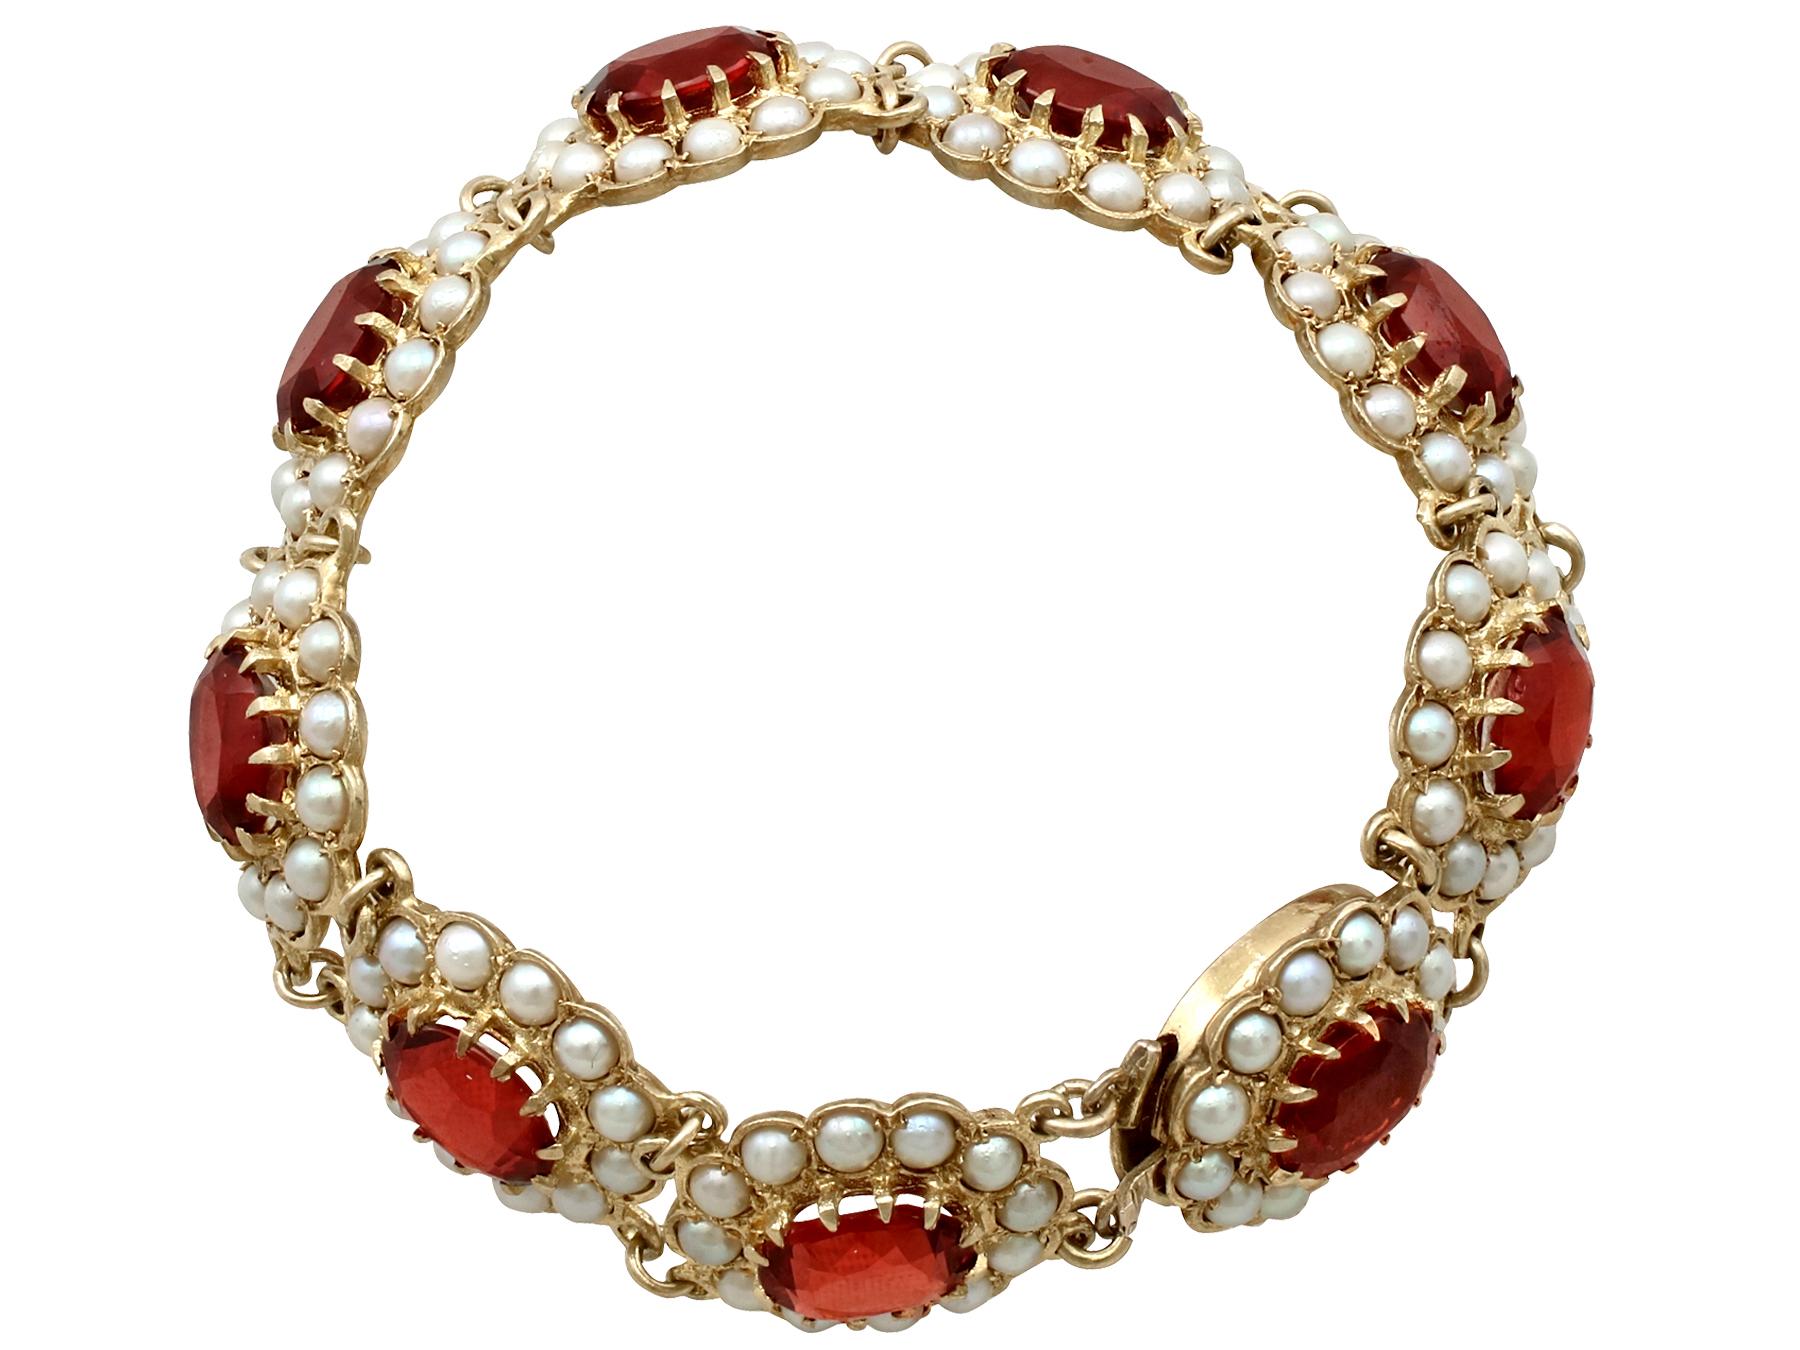 An impressive vintage 13.95 carat almandine garnet and seed pearl, 9 karat yellow gold bracelet; part of our diverse antique jewelry and estate jewelry collections.

This fine and impressive vintage bracelet has been crafted in 9k yellow gold.

The